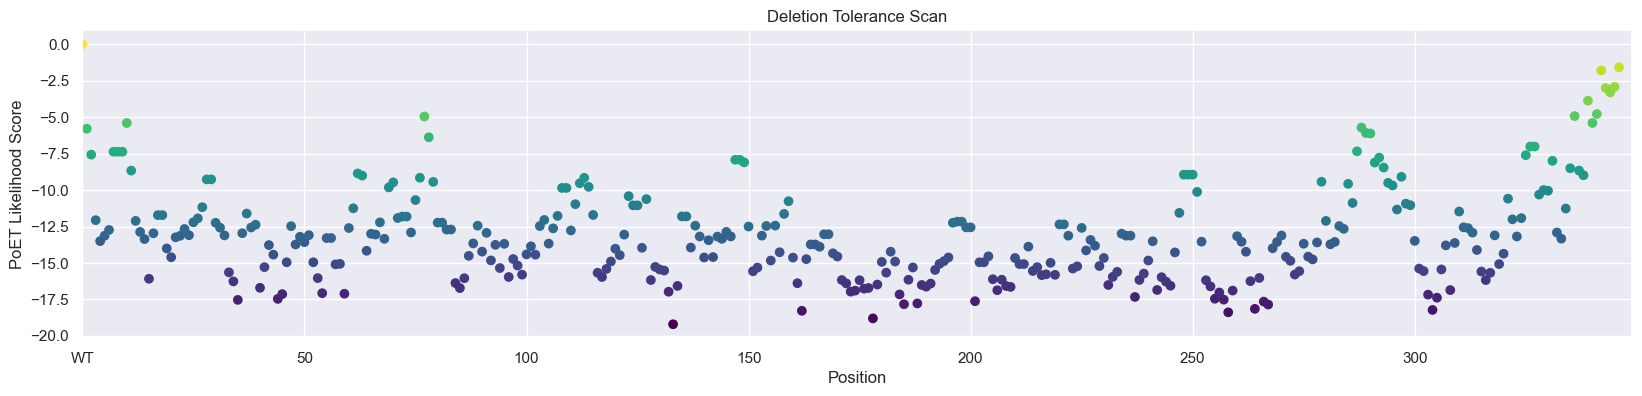 ../_images/demos_AMIE_substitution_deletion_analysis_poet_60_0.png